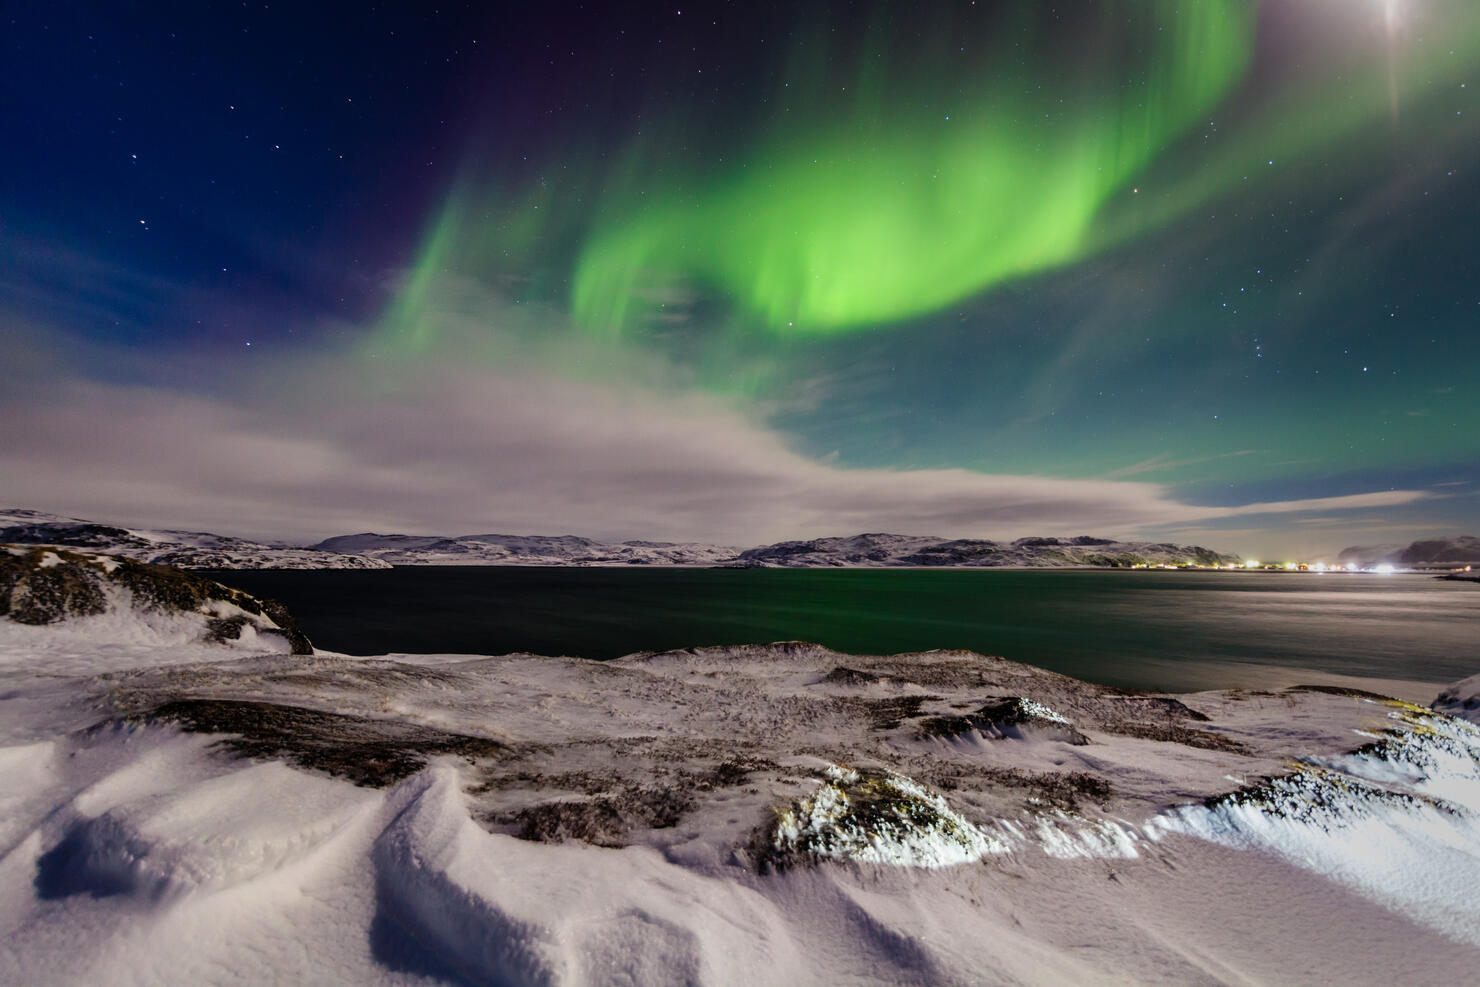 Northern lights in the snow-covered mountains